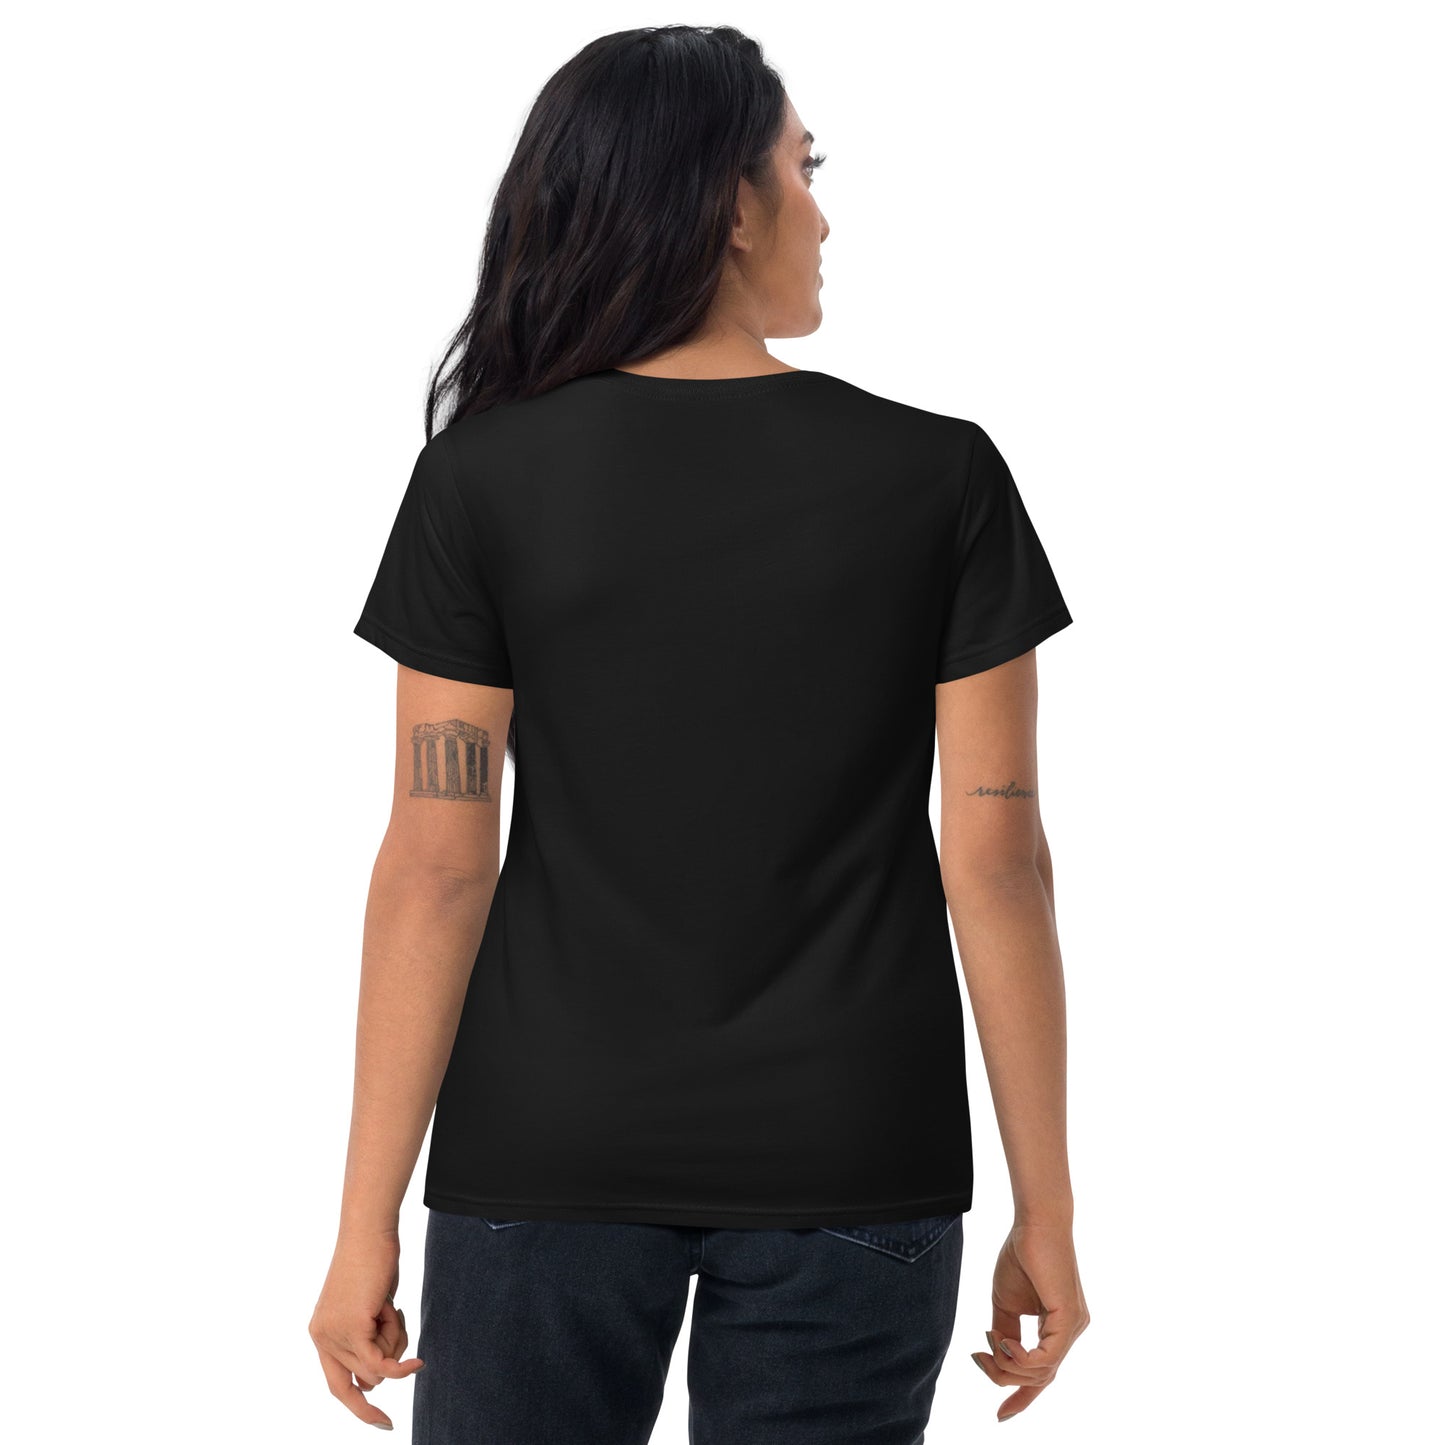 Carry The Funk On Women's short sleeve t-shirt